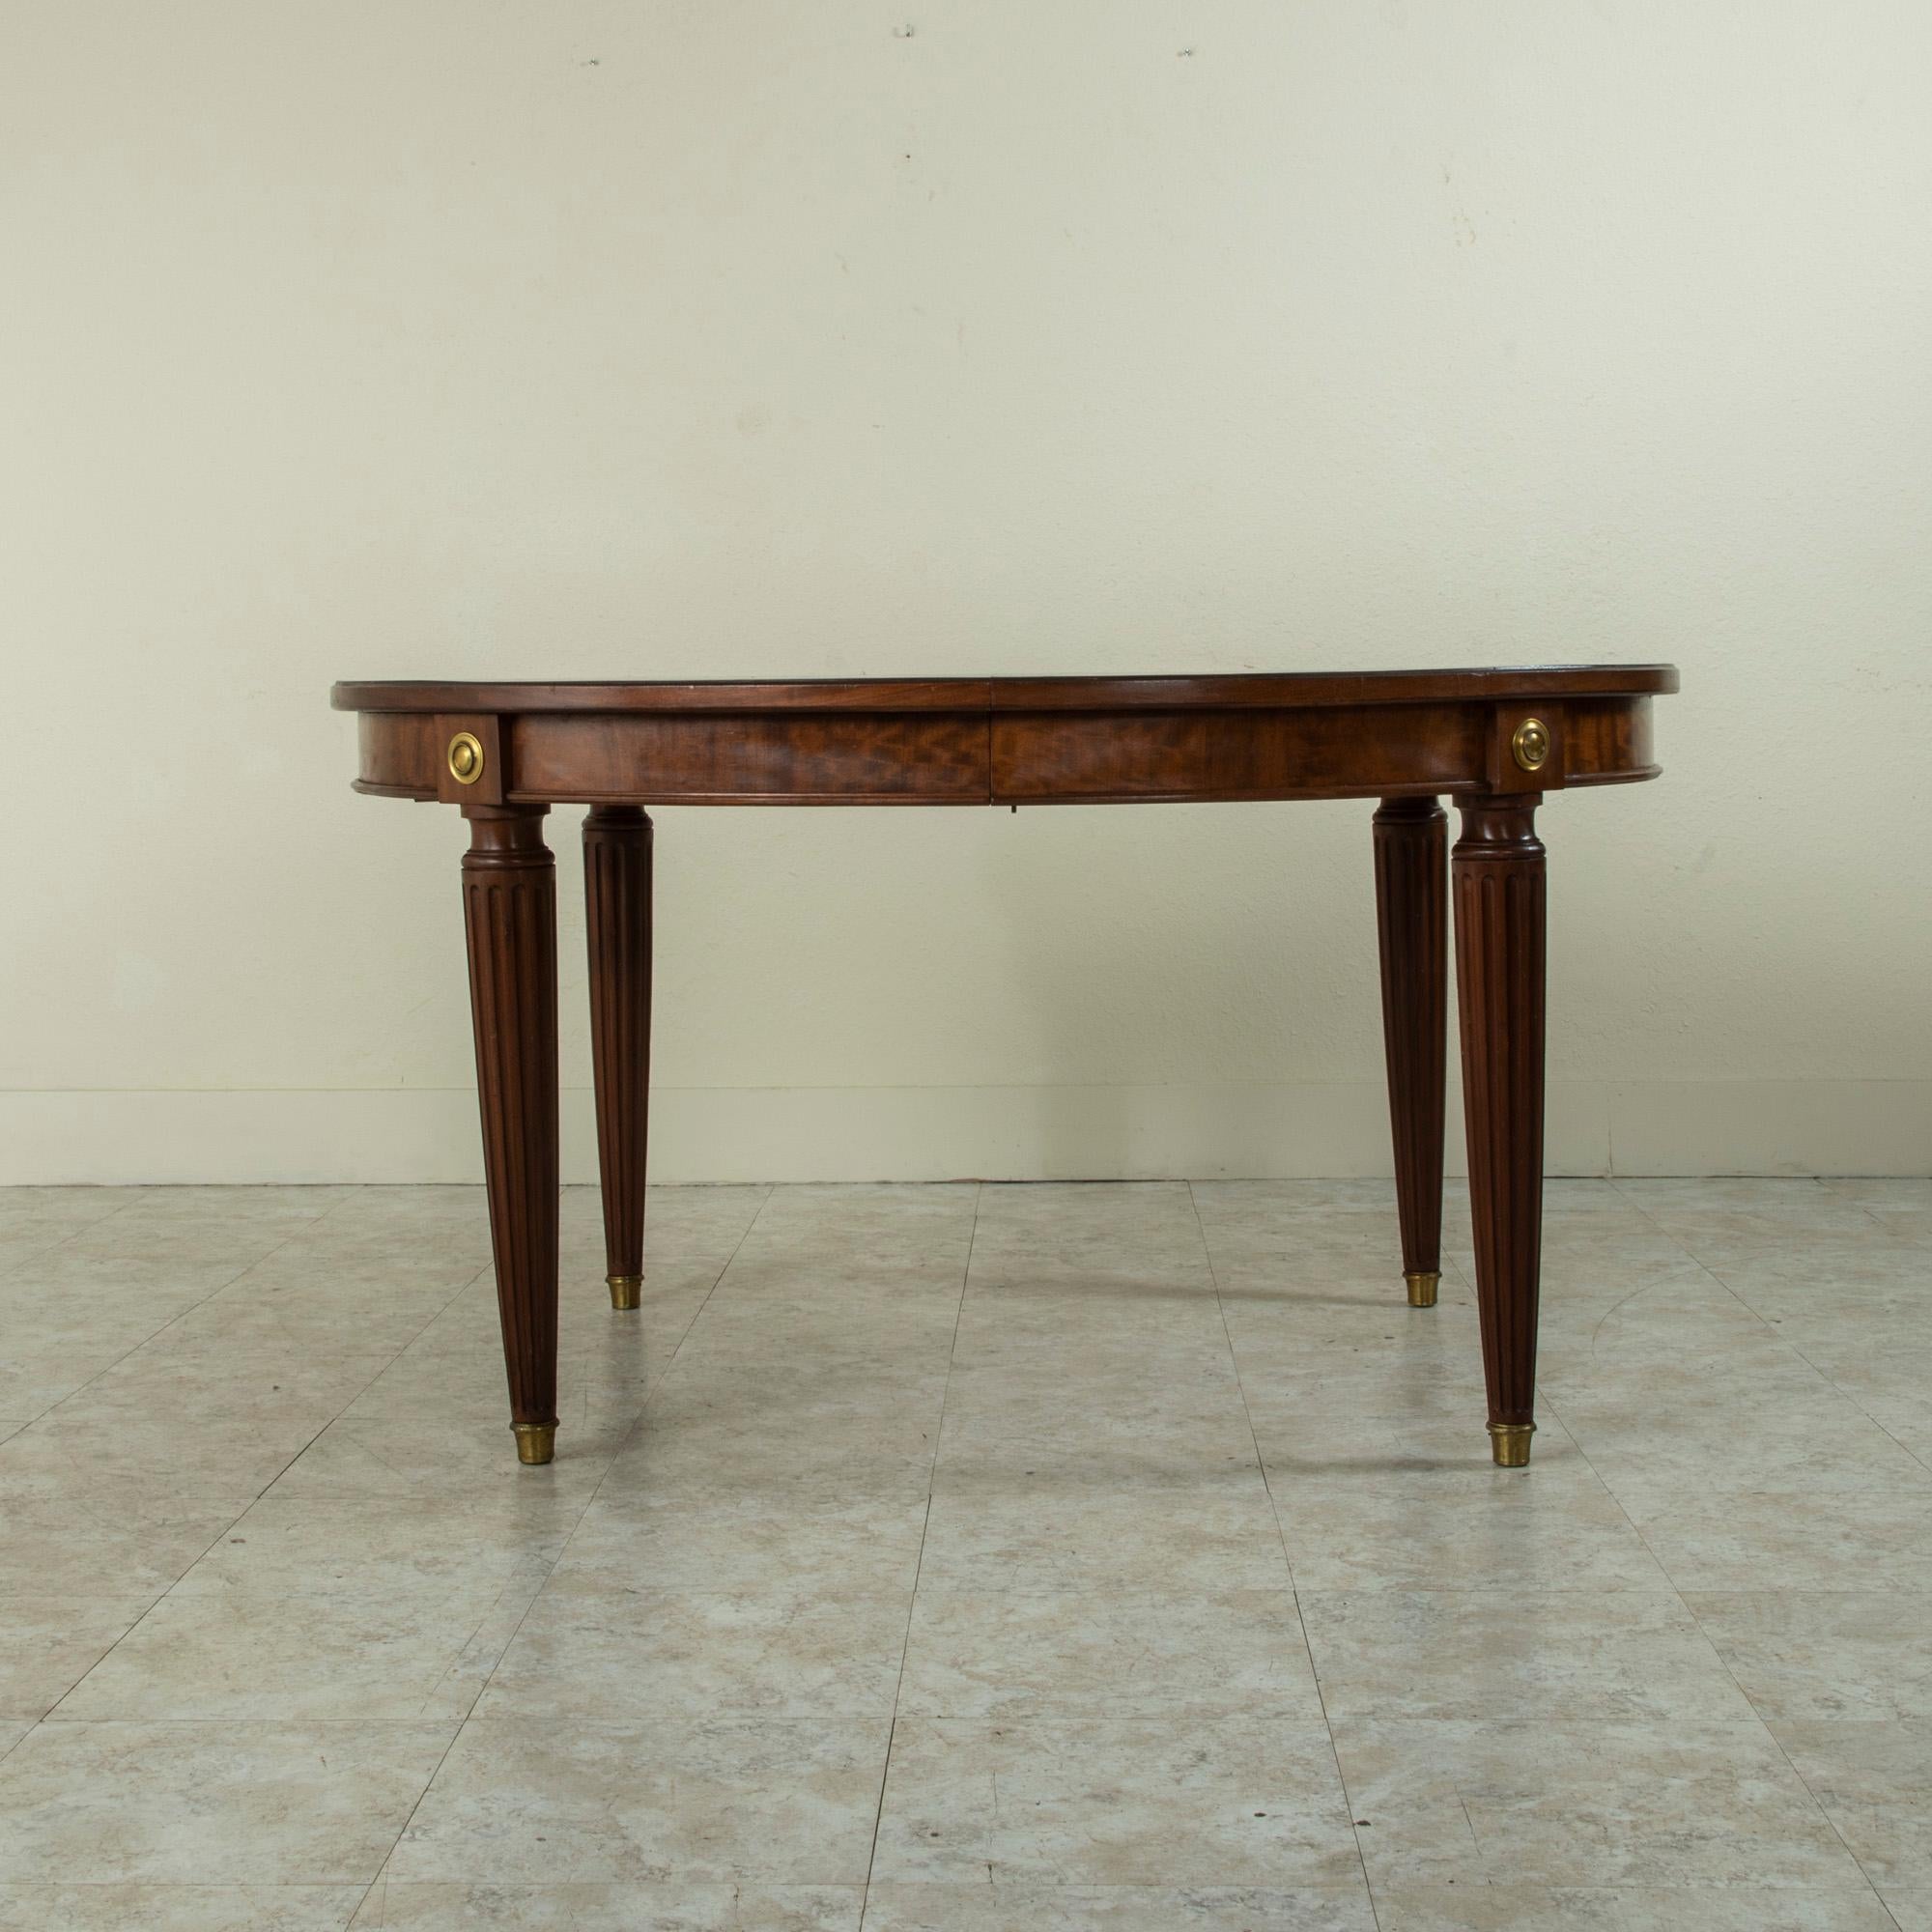 This late nineteenth century French mahogany oval dining table features a beveled top and round bronze medallions detailed with beading at the die joints. The top rests on tapered fluted legs finished with bronze sabots. From floor to apron measures